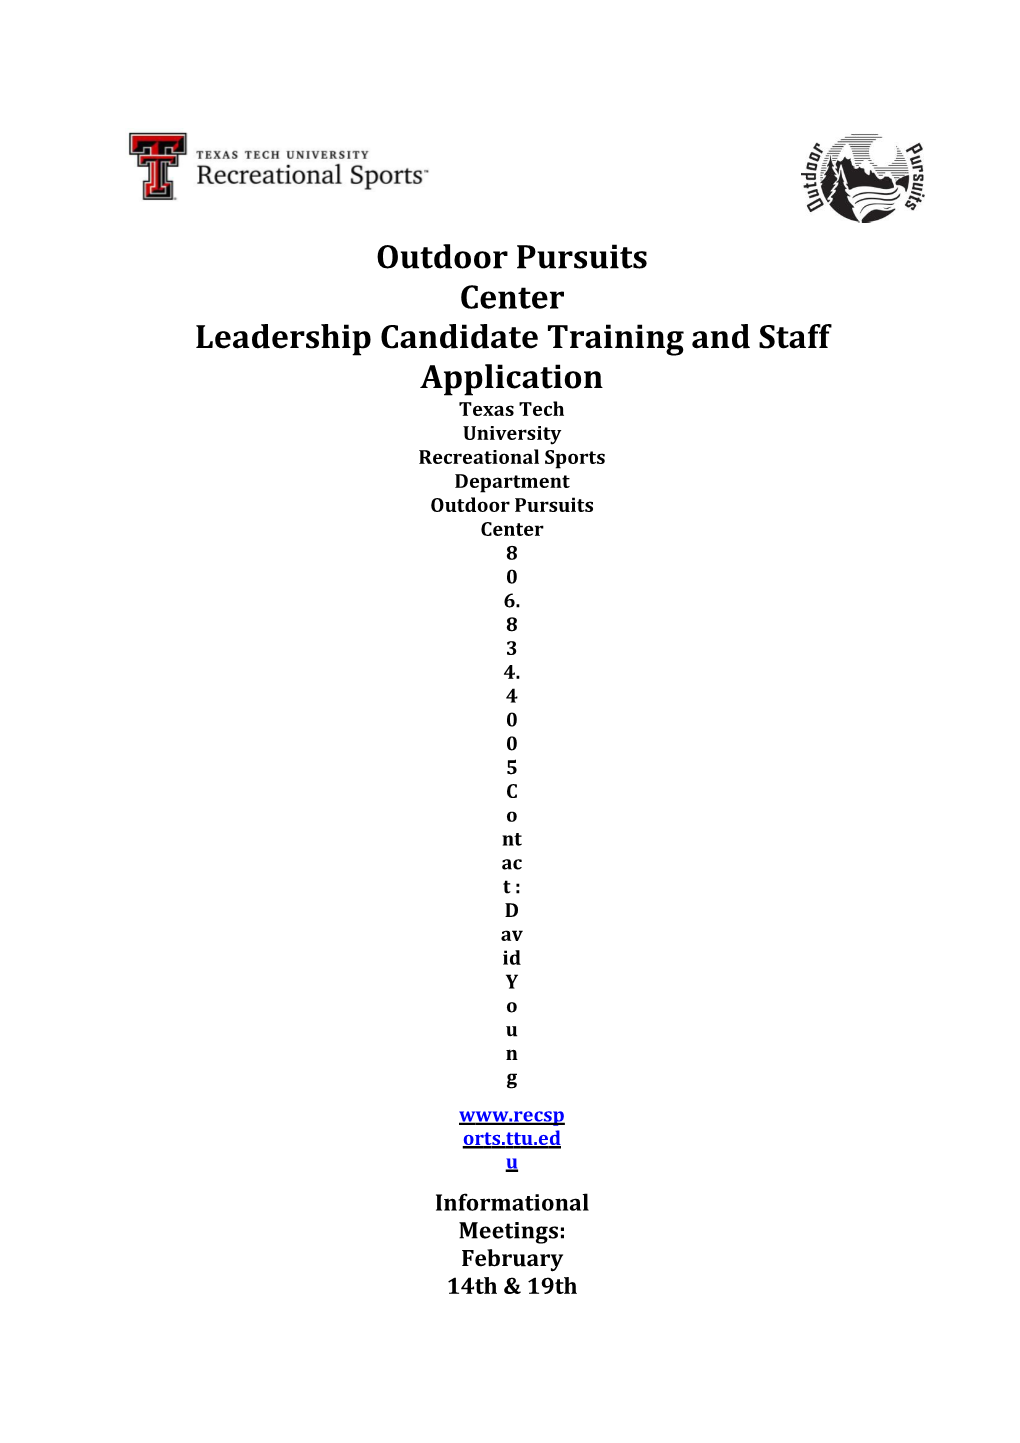 Leadership Candidate Training and Staff Application